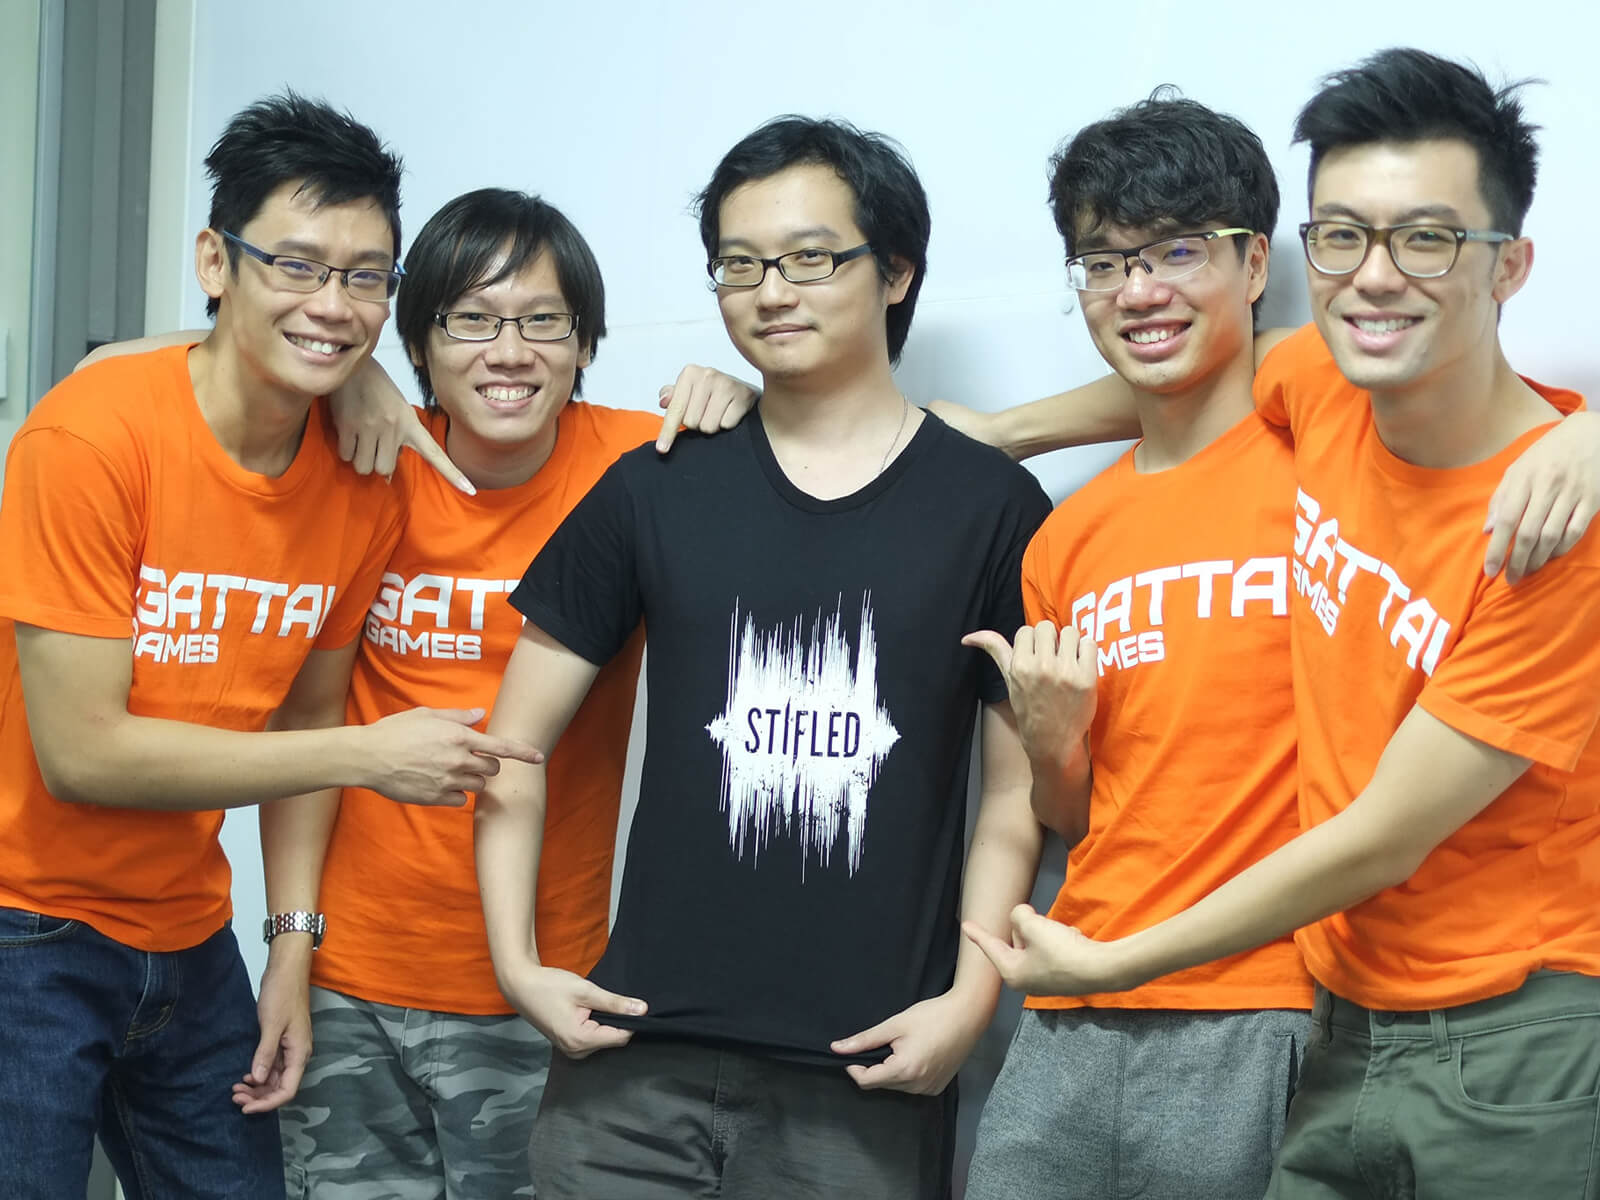 Five members of the Stifled dev team, four in orange t-shirts reading "Gattai Games," and one in a black t-shirt